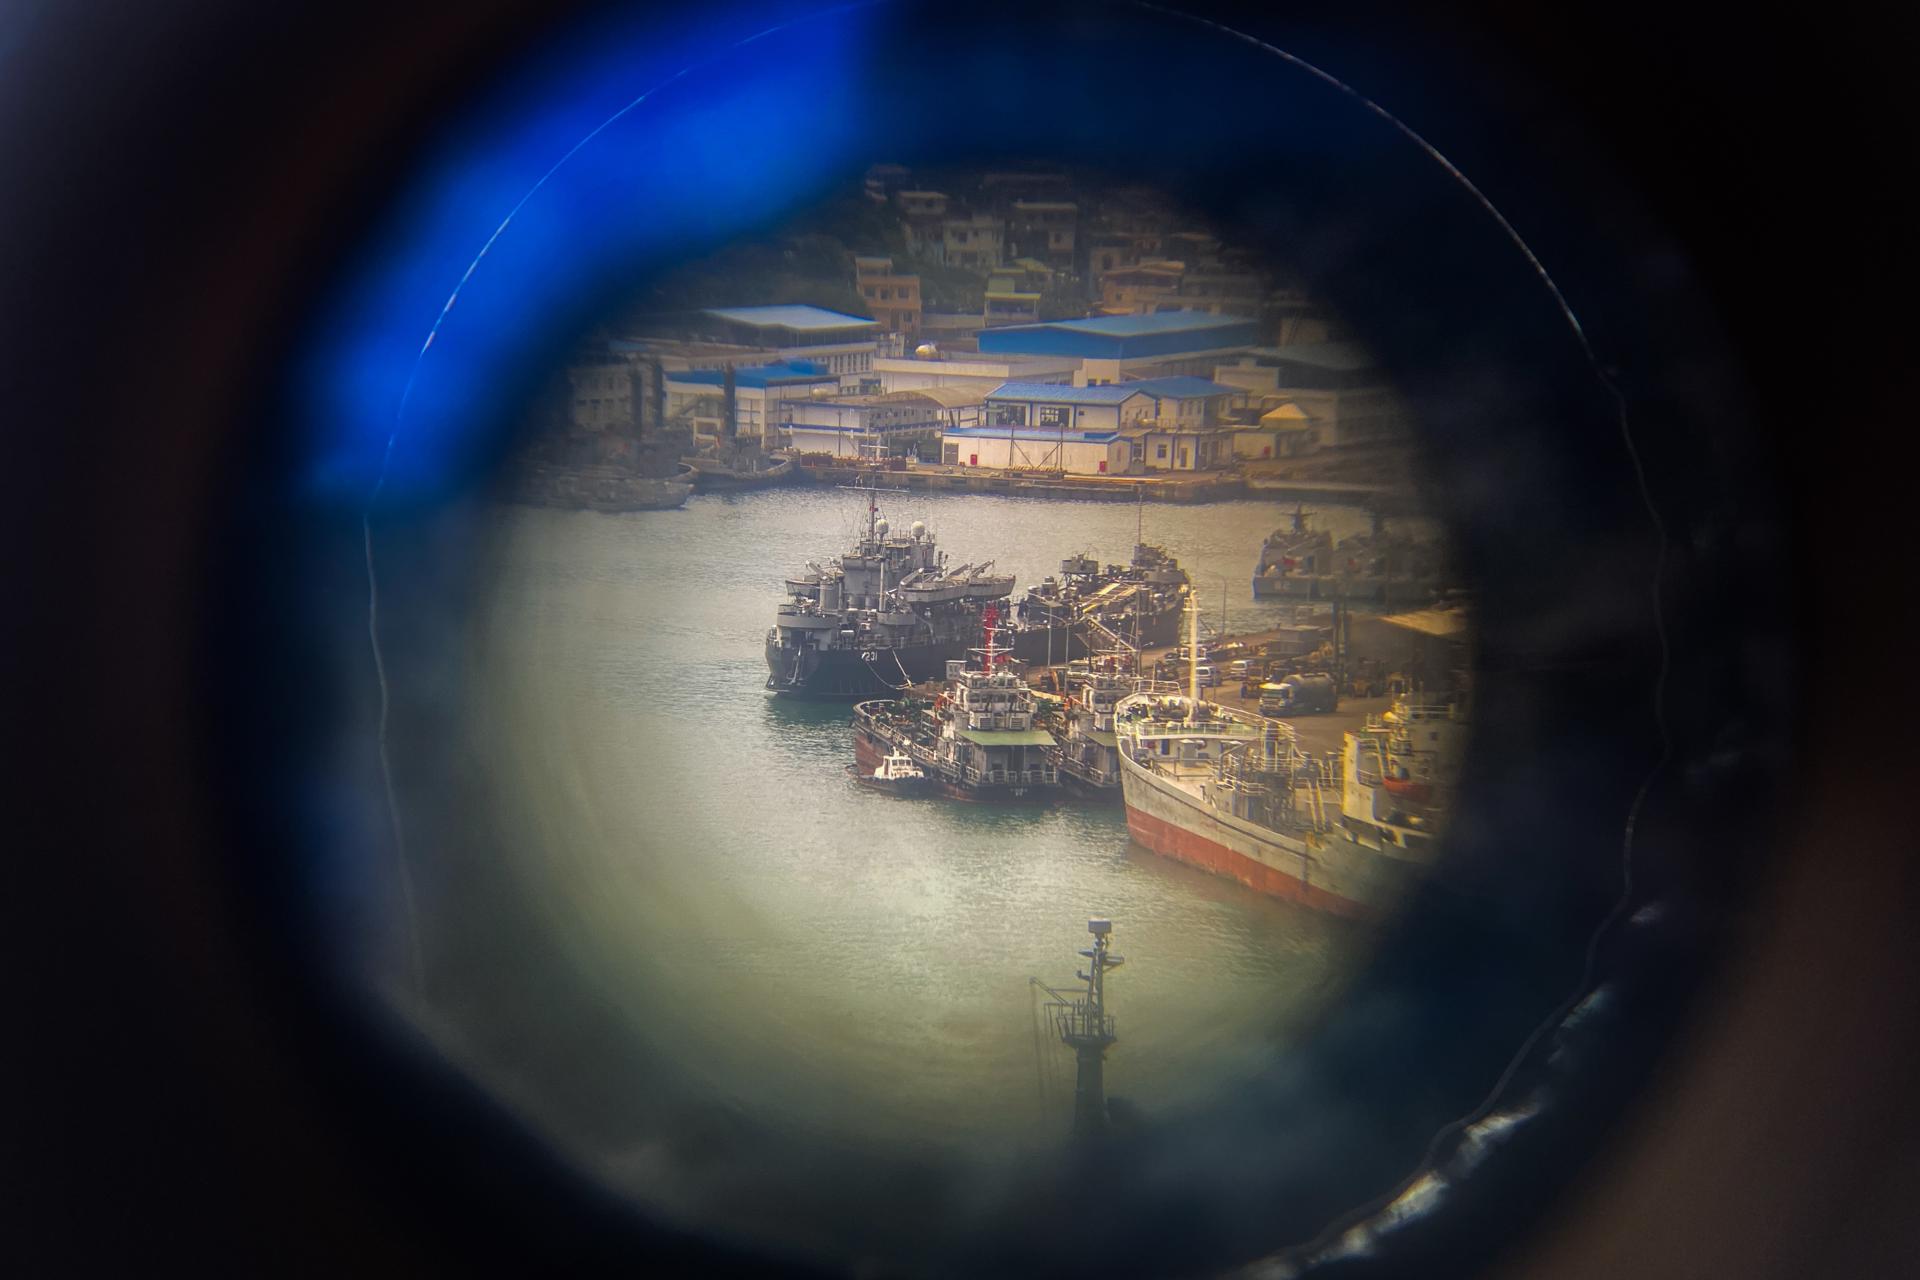 Taiwan Navy vessels are seen through a binocular as they are anchored in Keelung harbor in Keelung city, Taiwan, 10 April 2023. EFE/EPA/RITCHIE B. TONGO